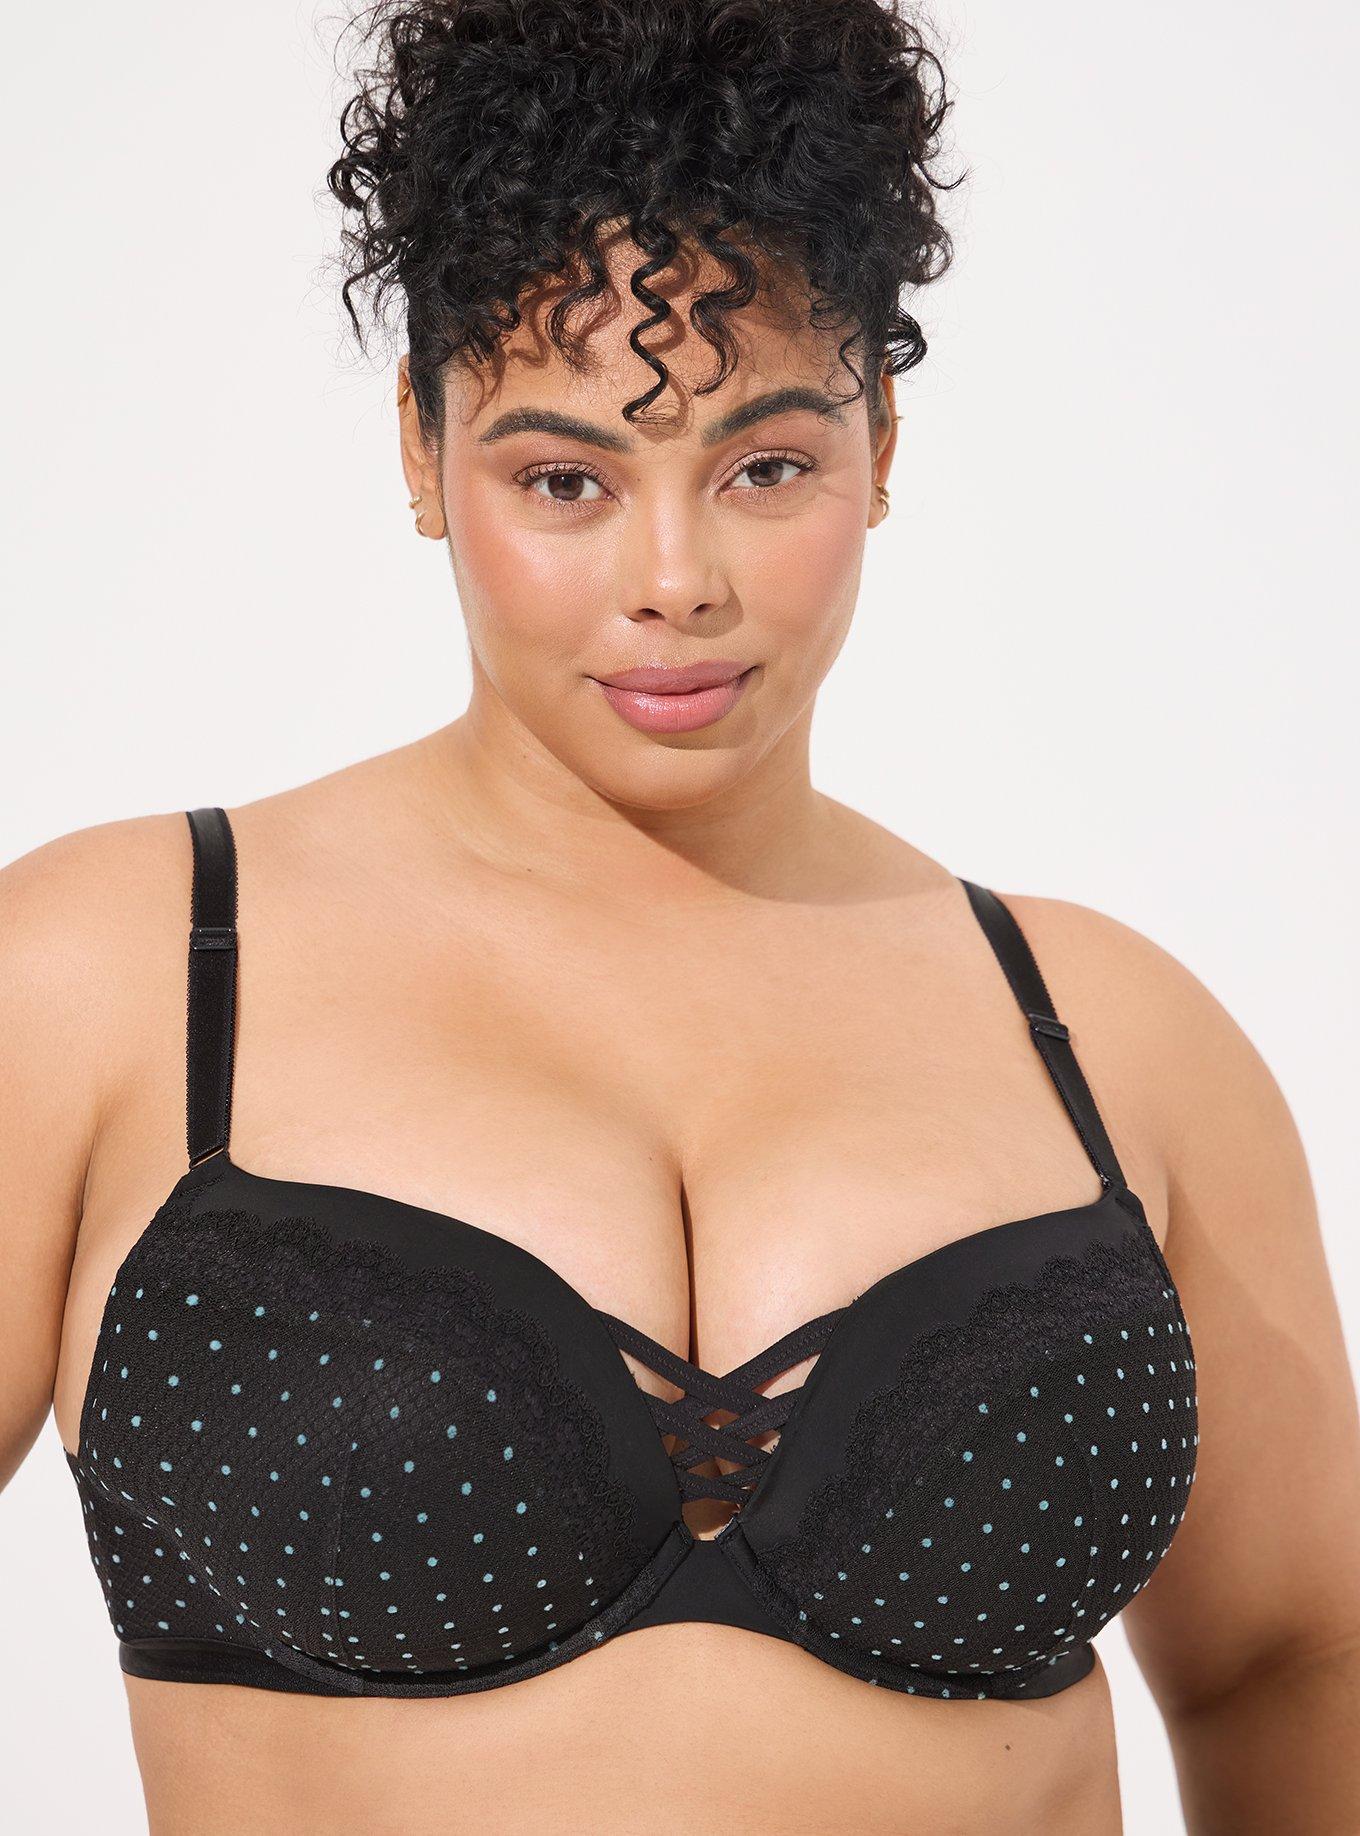 Torrid Size 46C Push Up Plunge Charcoal Gray Bra - $32 - From